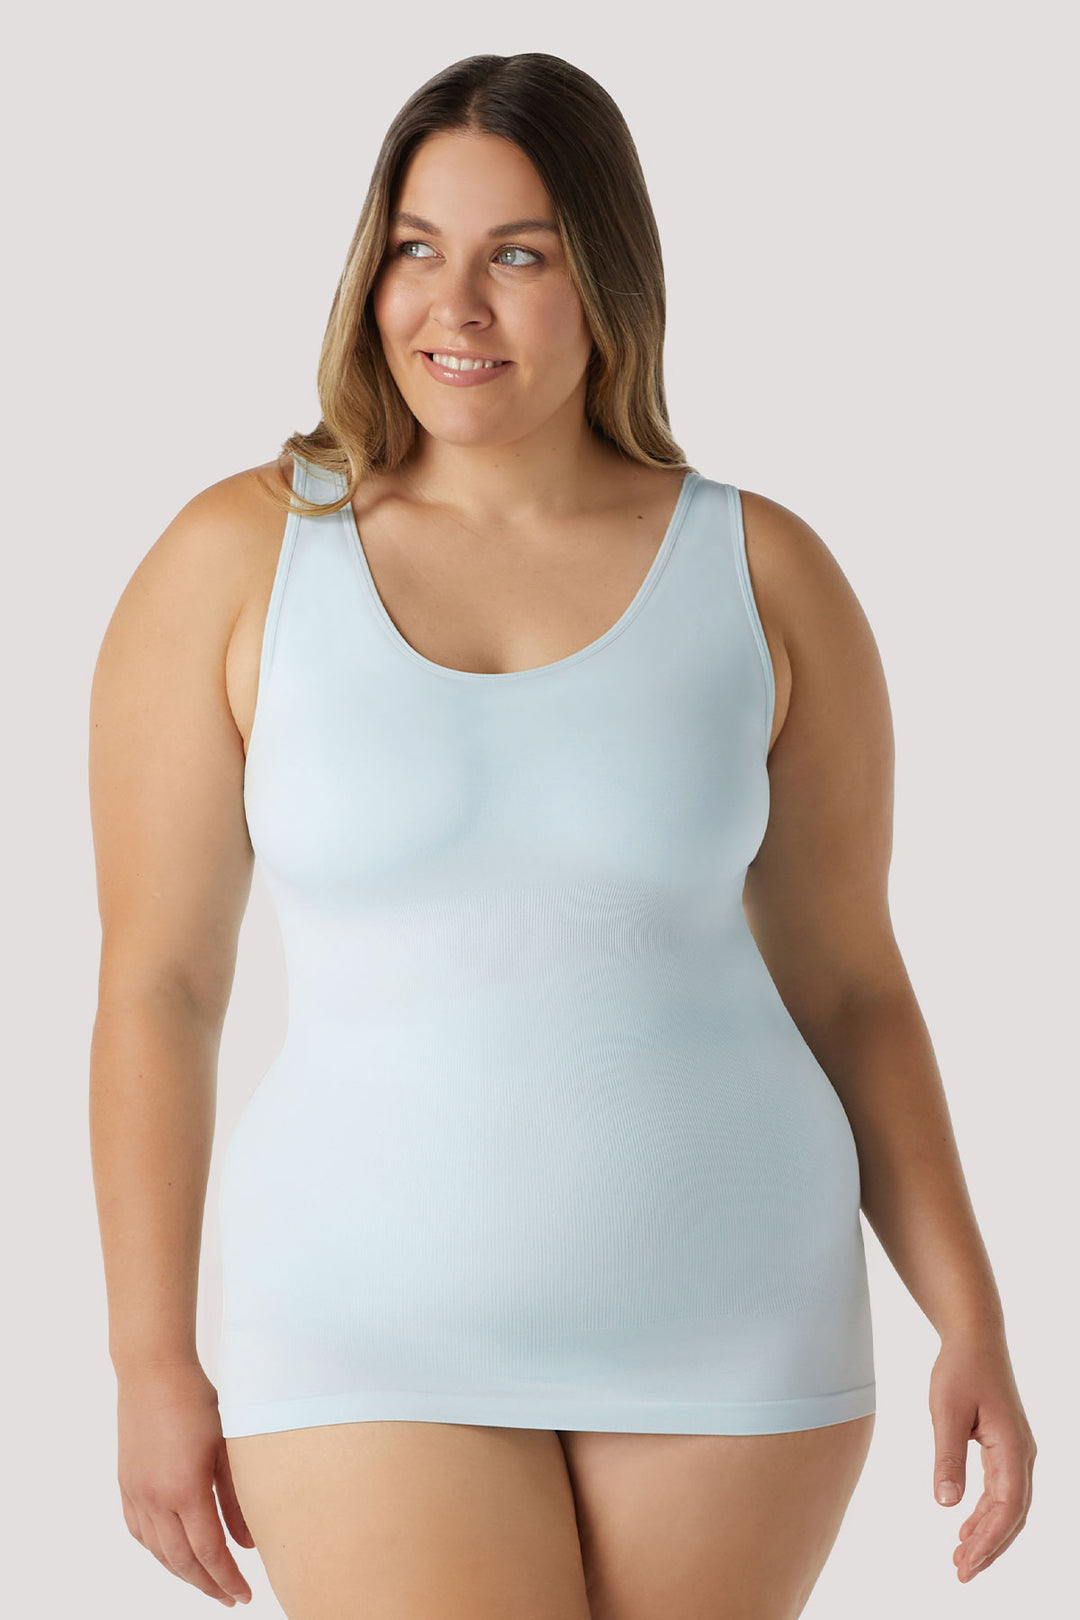 Womens Shapewear Clothes at Best Prices in Sri Lanka